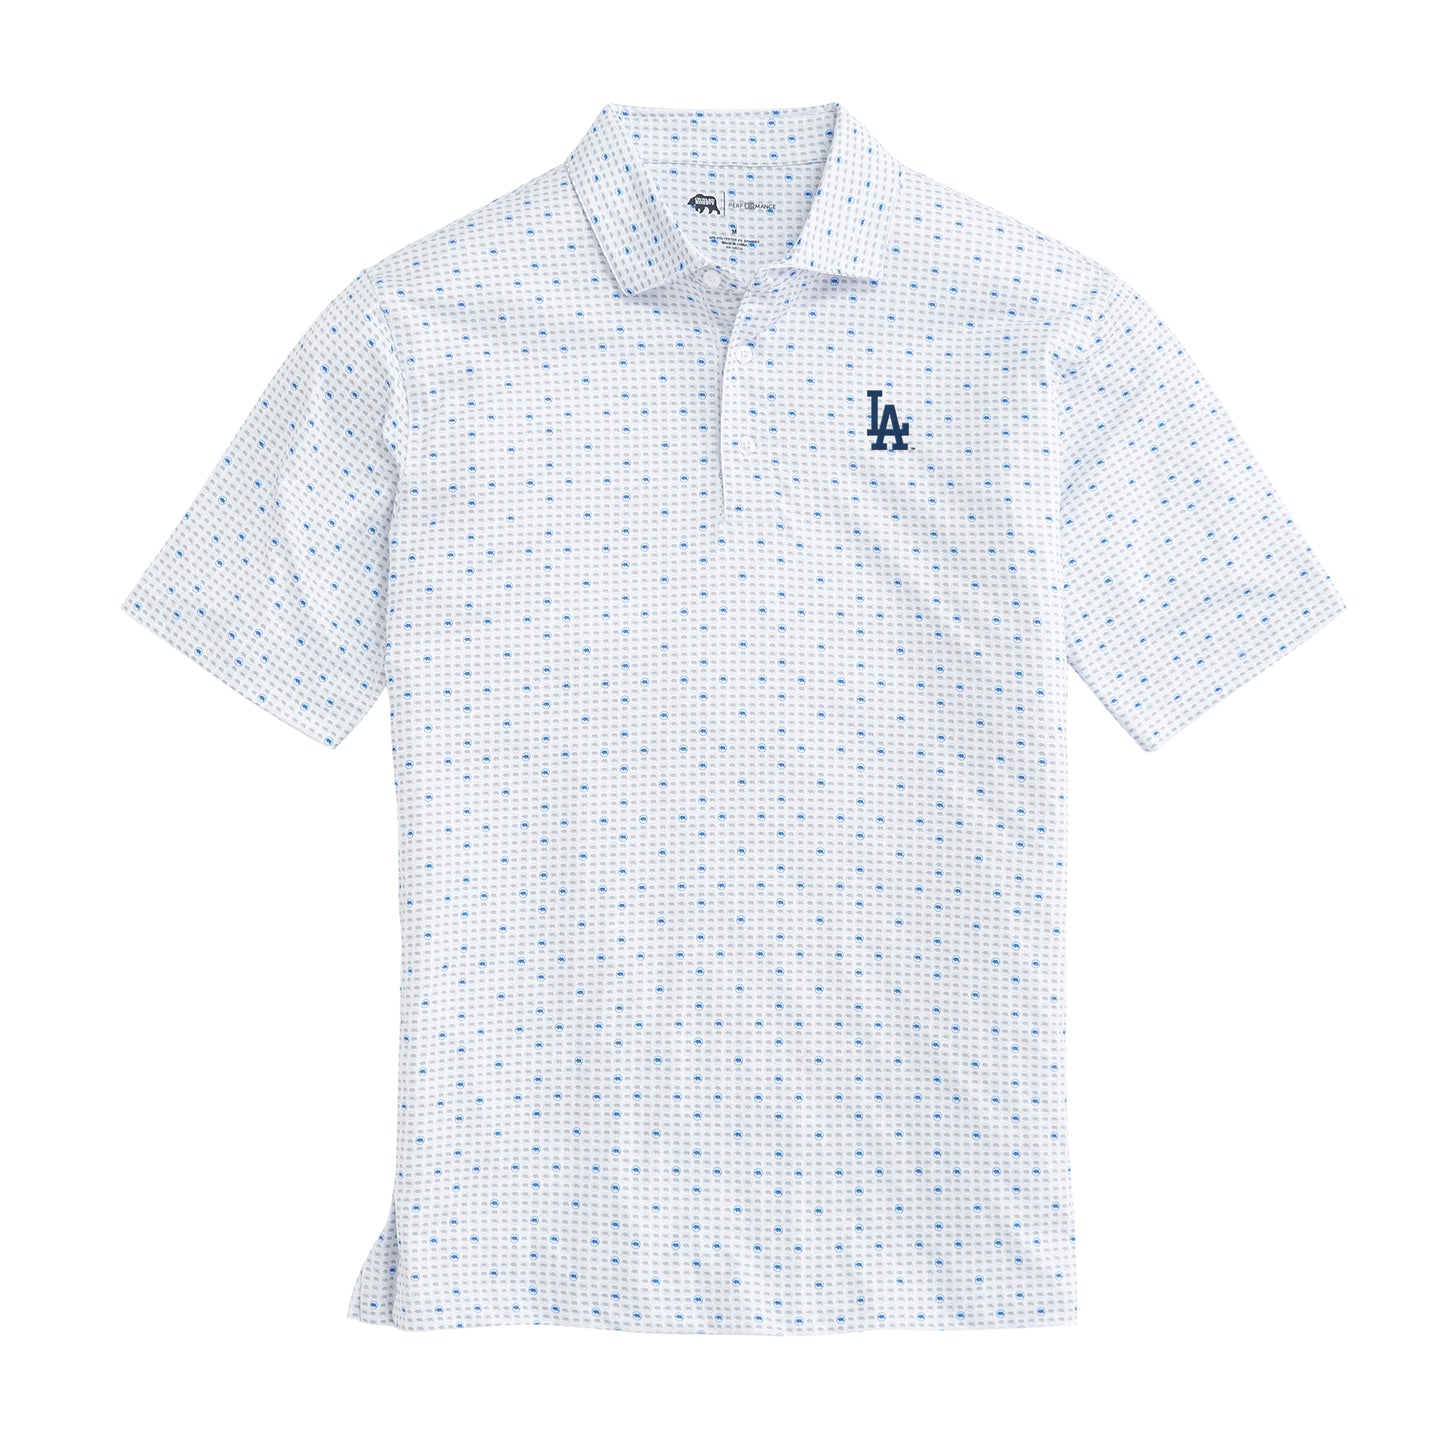 Los Angeles Dodgers Tour Logo Printed Performance Polo